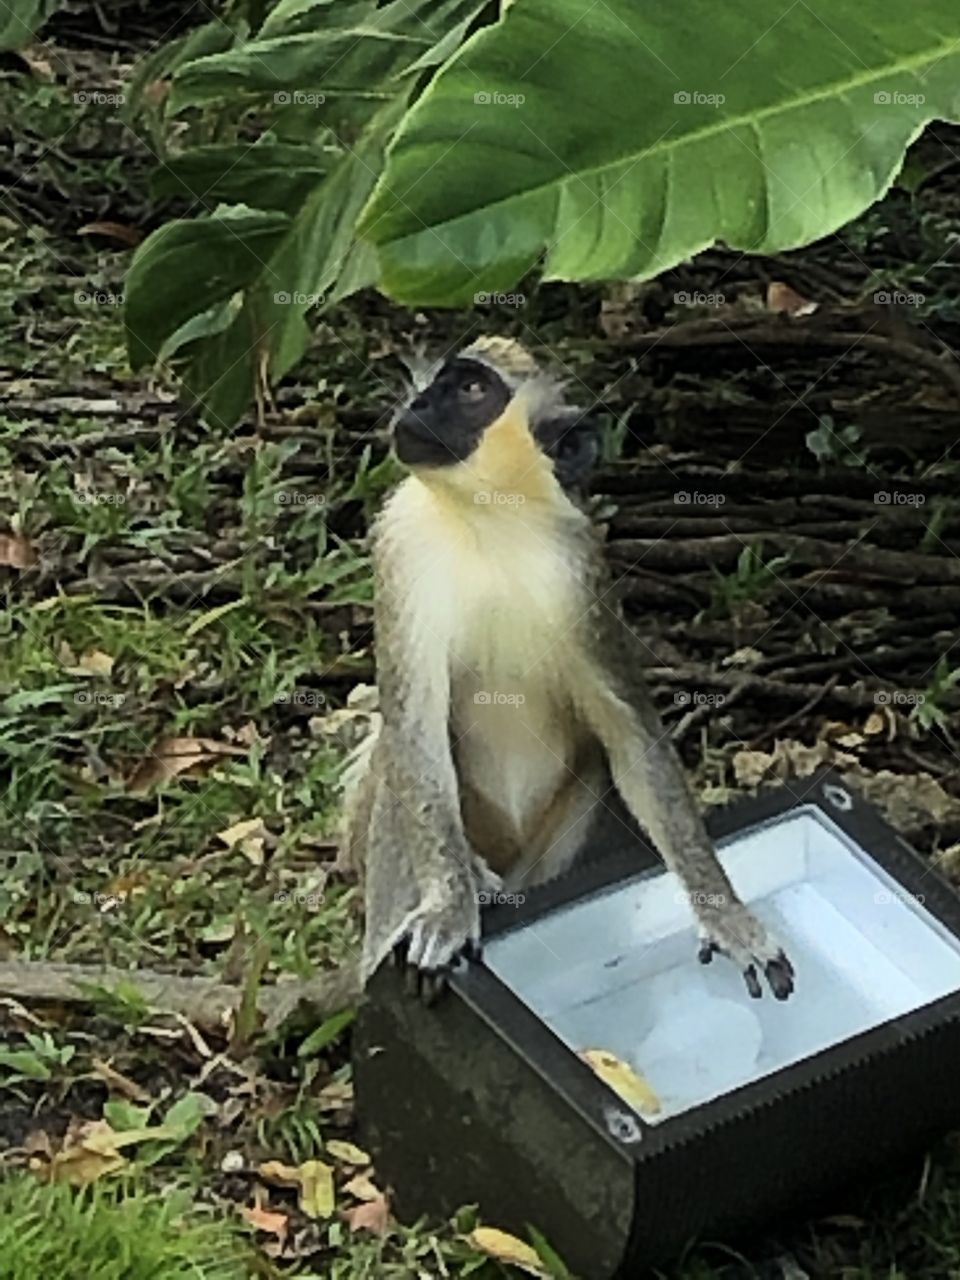 Monkey with arm on a box